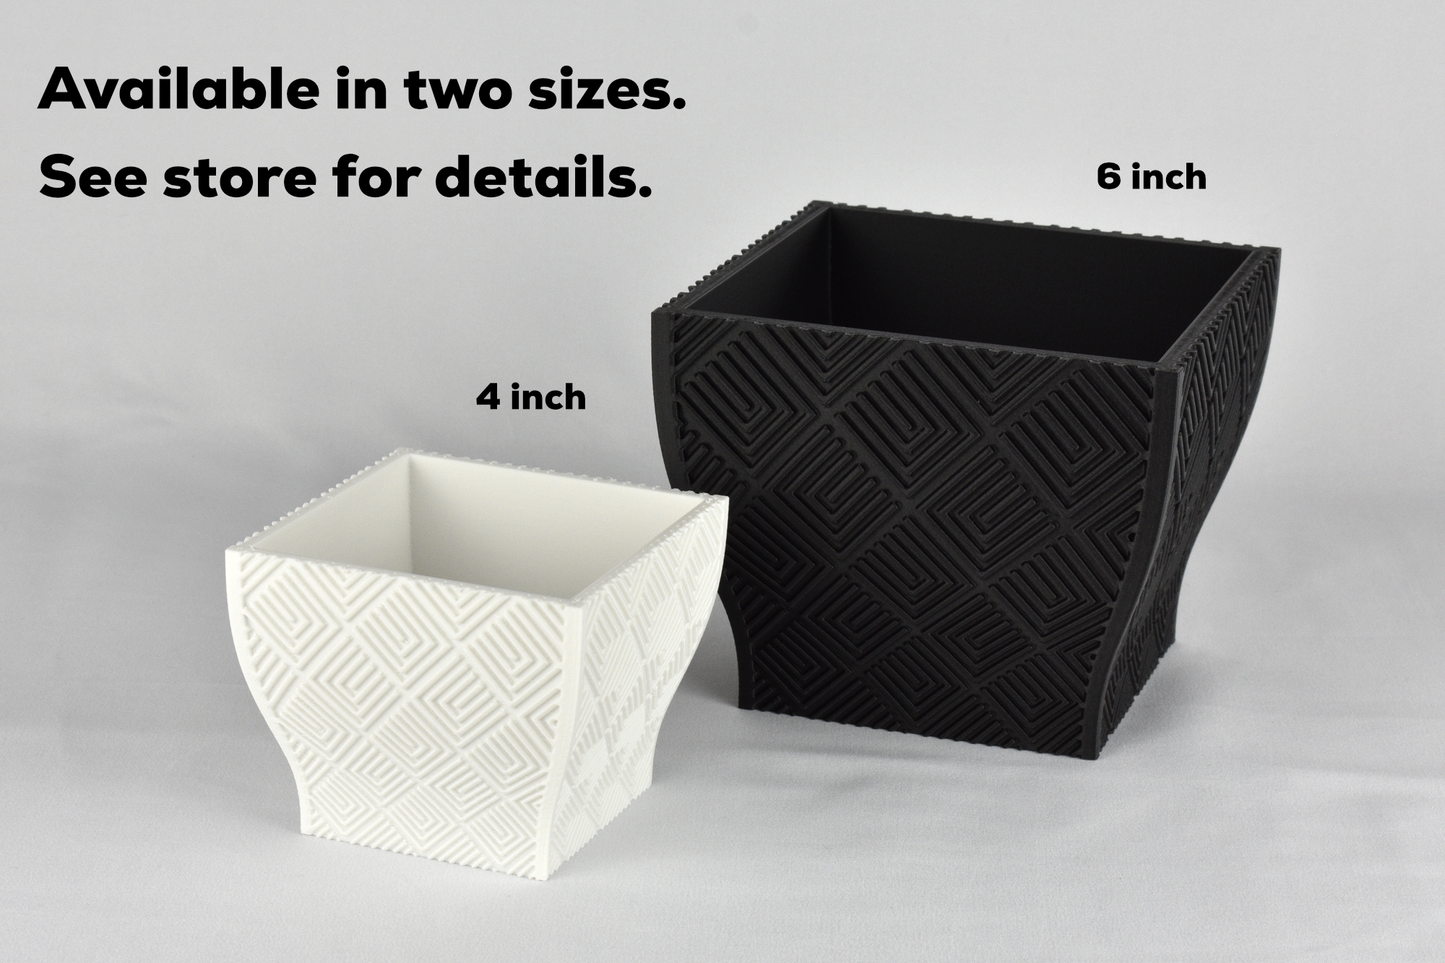 4-inch Square Planter, Geometric Pattern #3, Drainage, Optional Saucer, Outdoor Safe Flower Pot, 30+ Colors